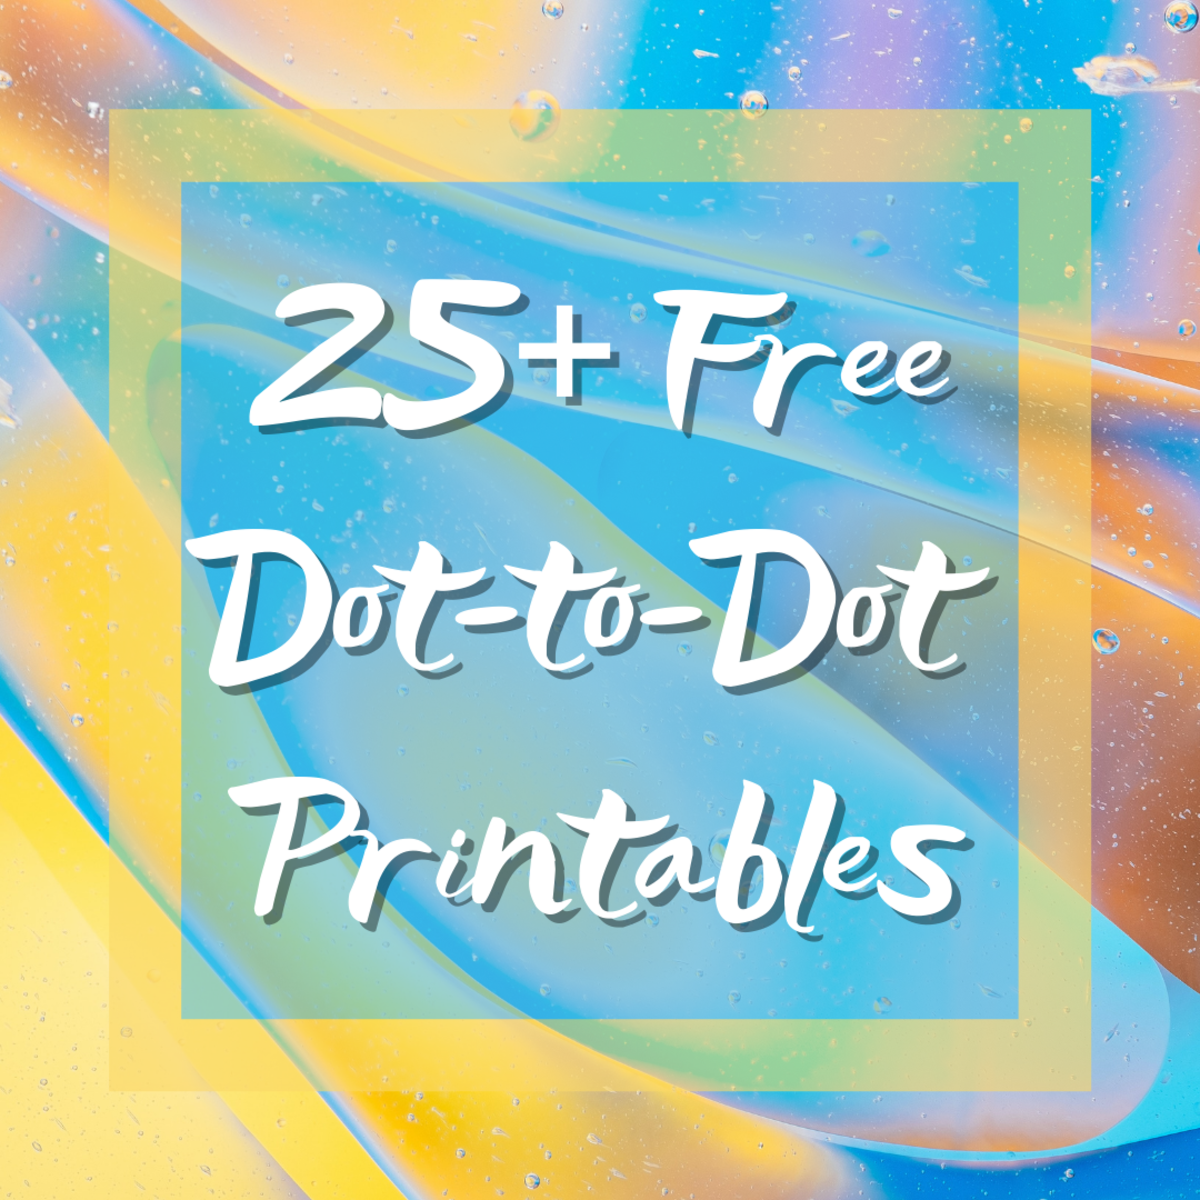 Find free connect-the-dot printables for you or your children to enjoy! You'll also learn some creative ways to utilize these worksheets.